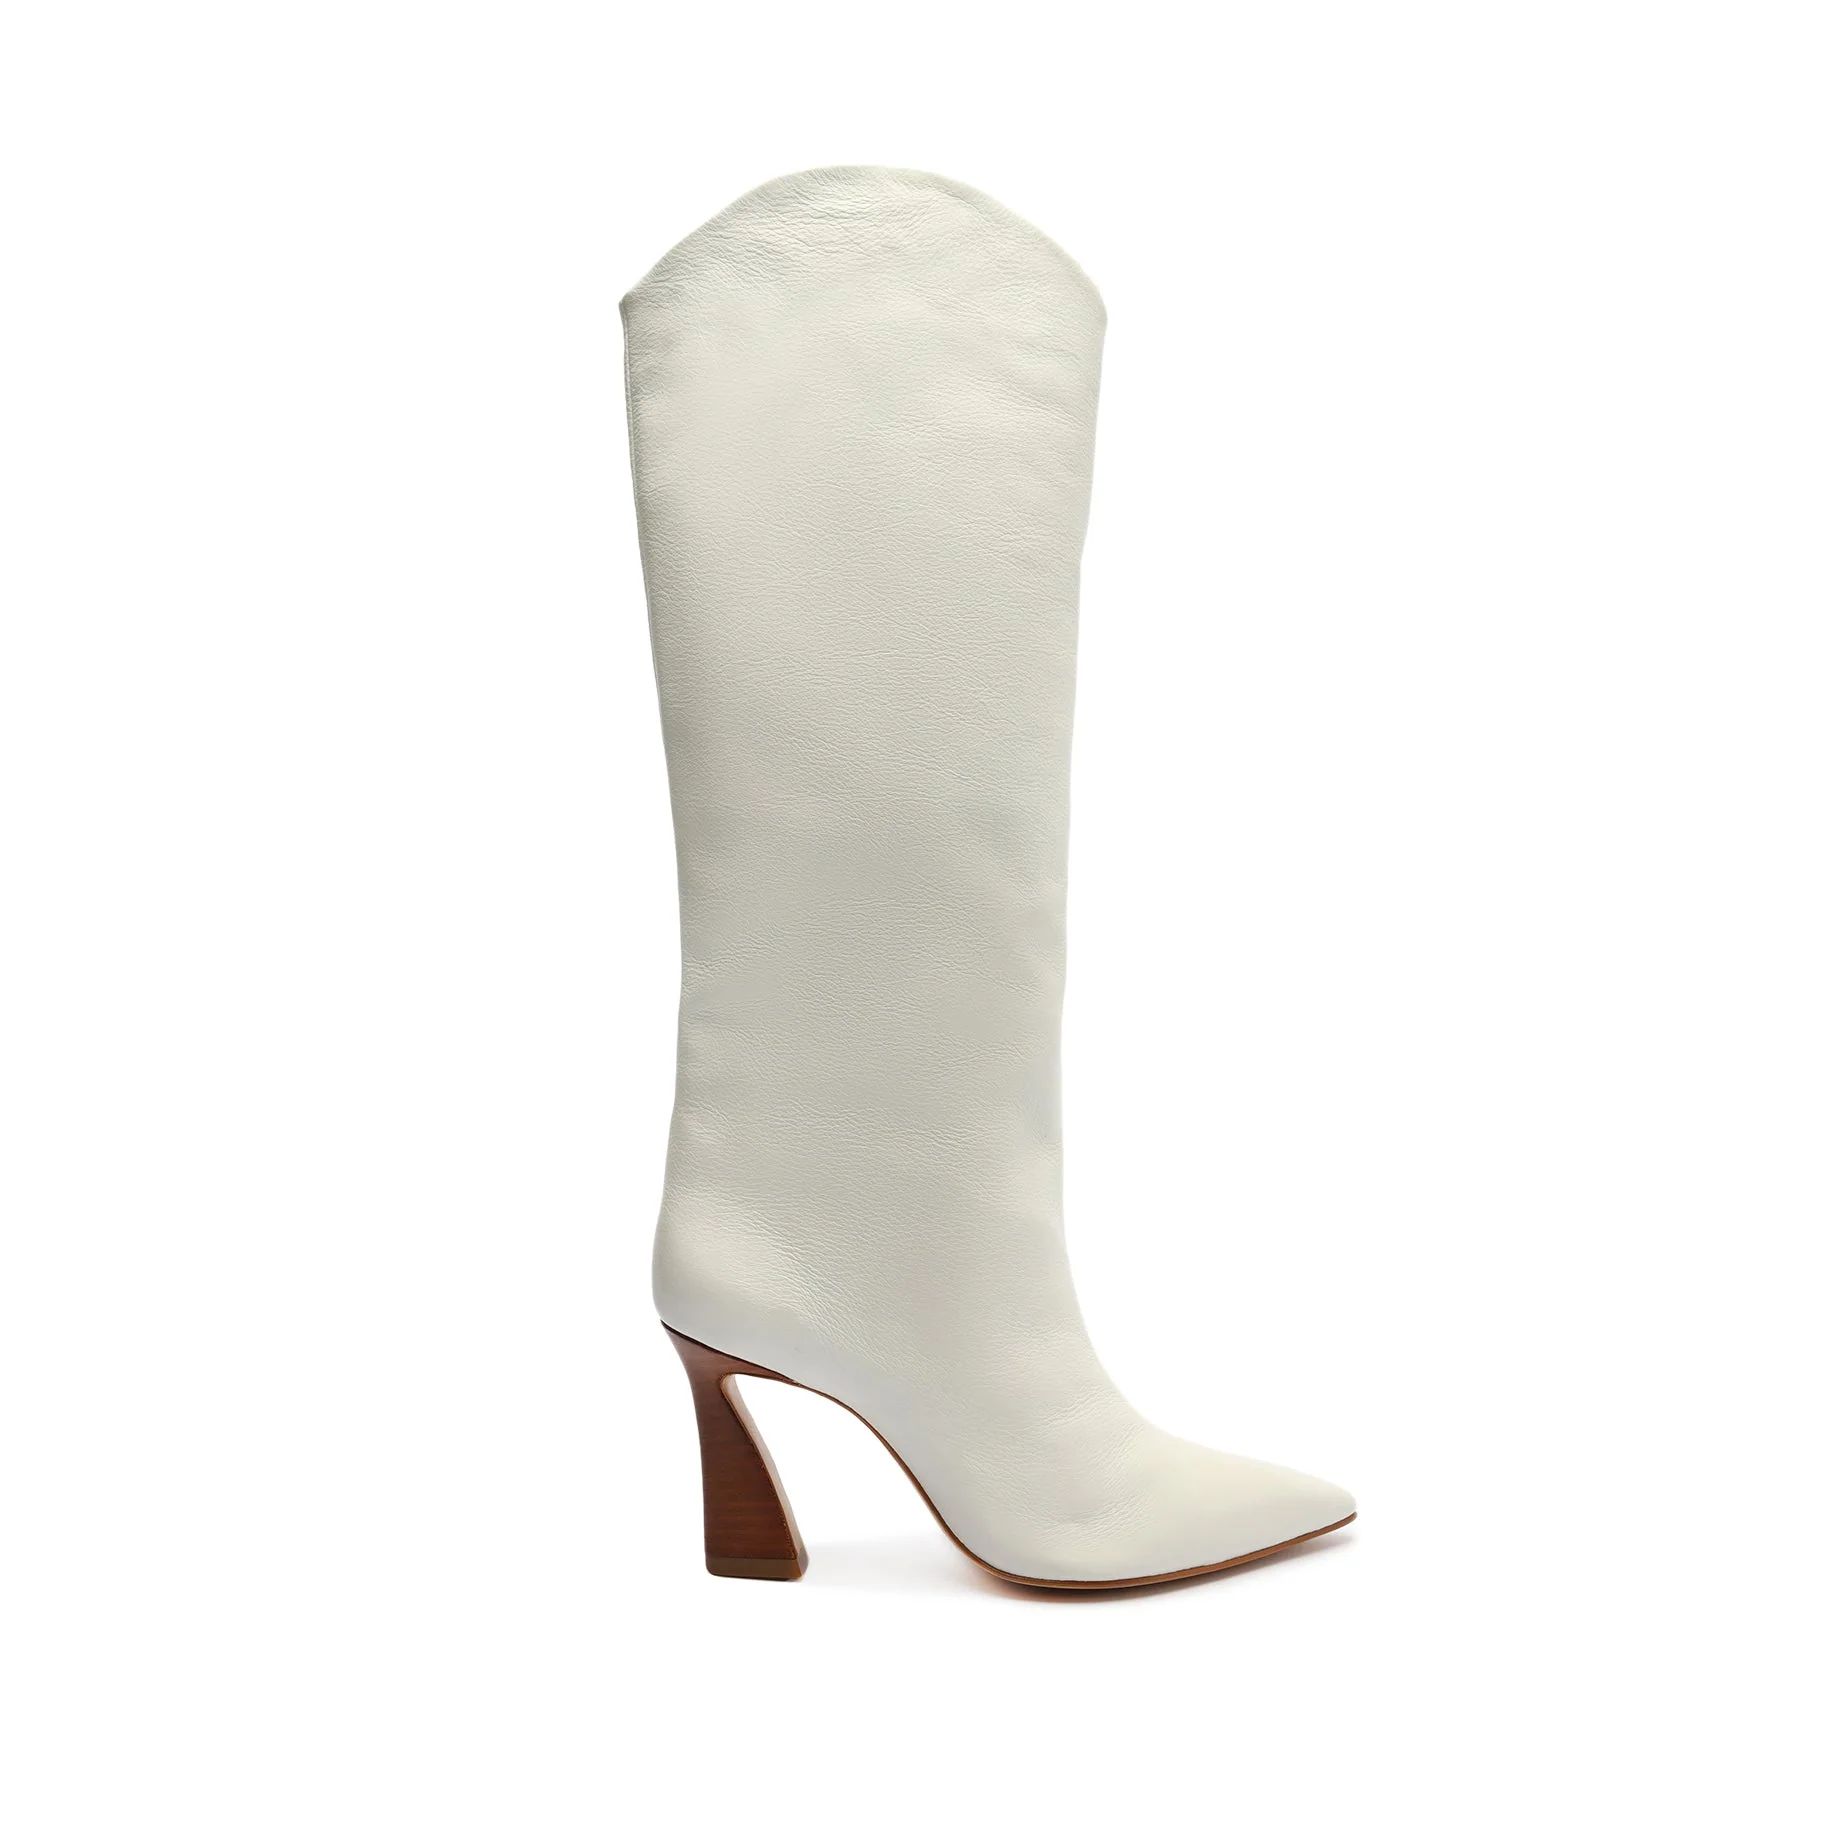 Maryana Flare Leather Boot: Most-Loved Ever | Schutz | Schutz Shoes (US)